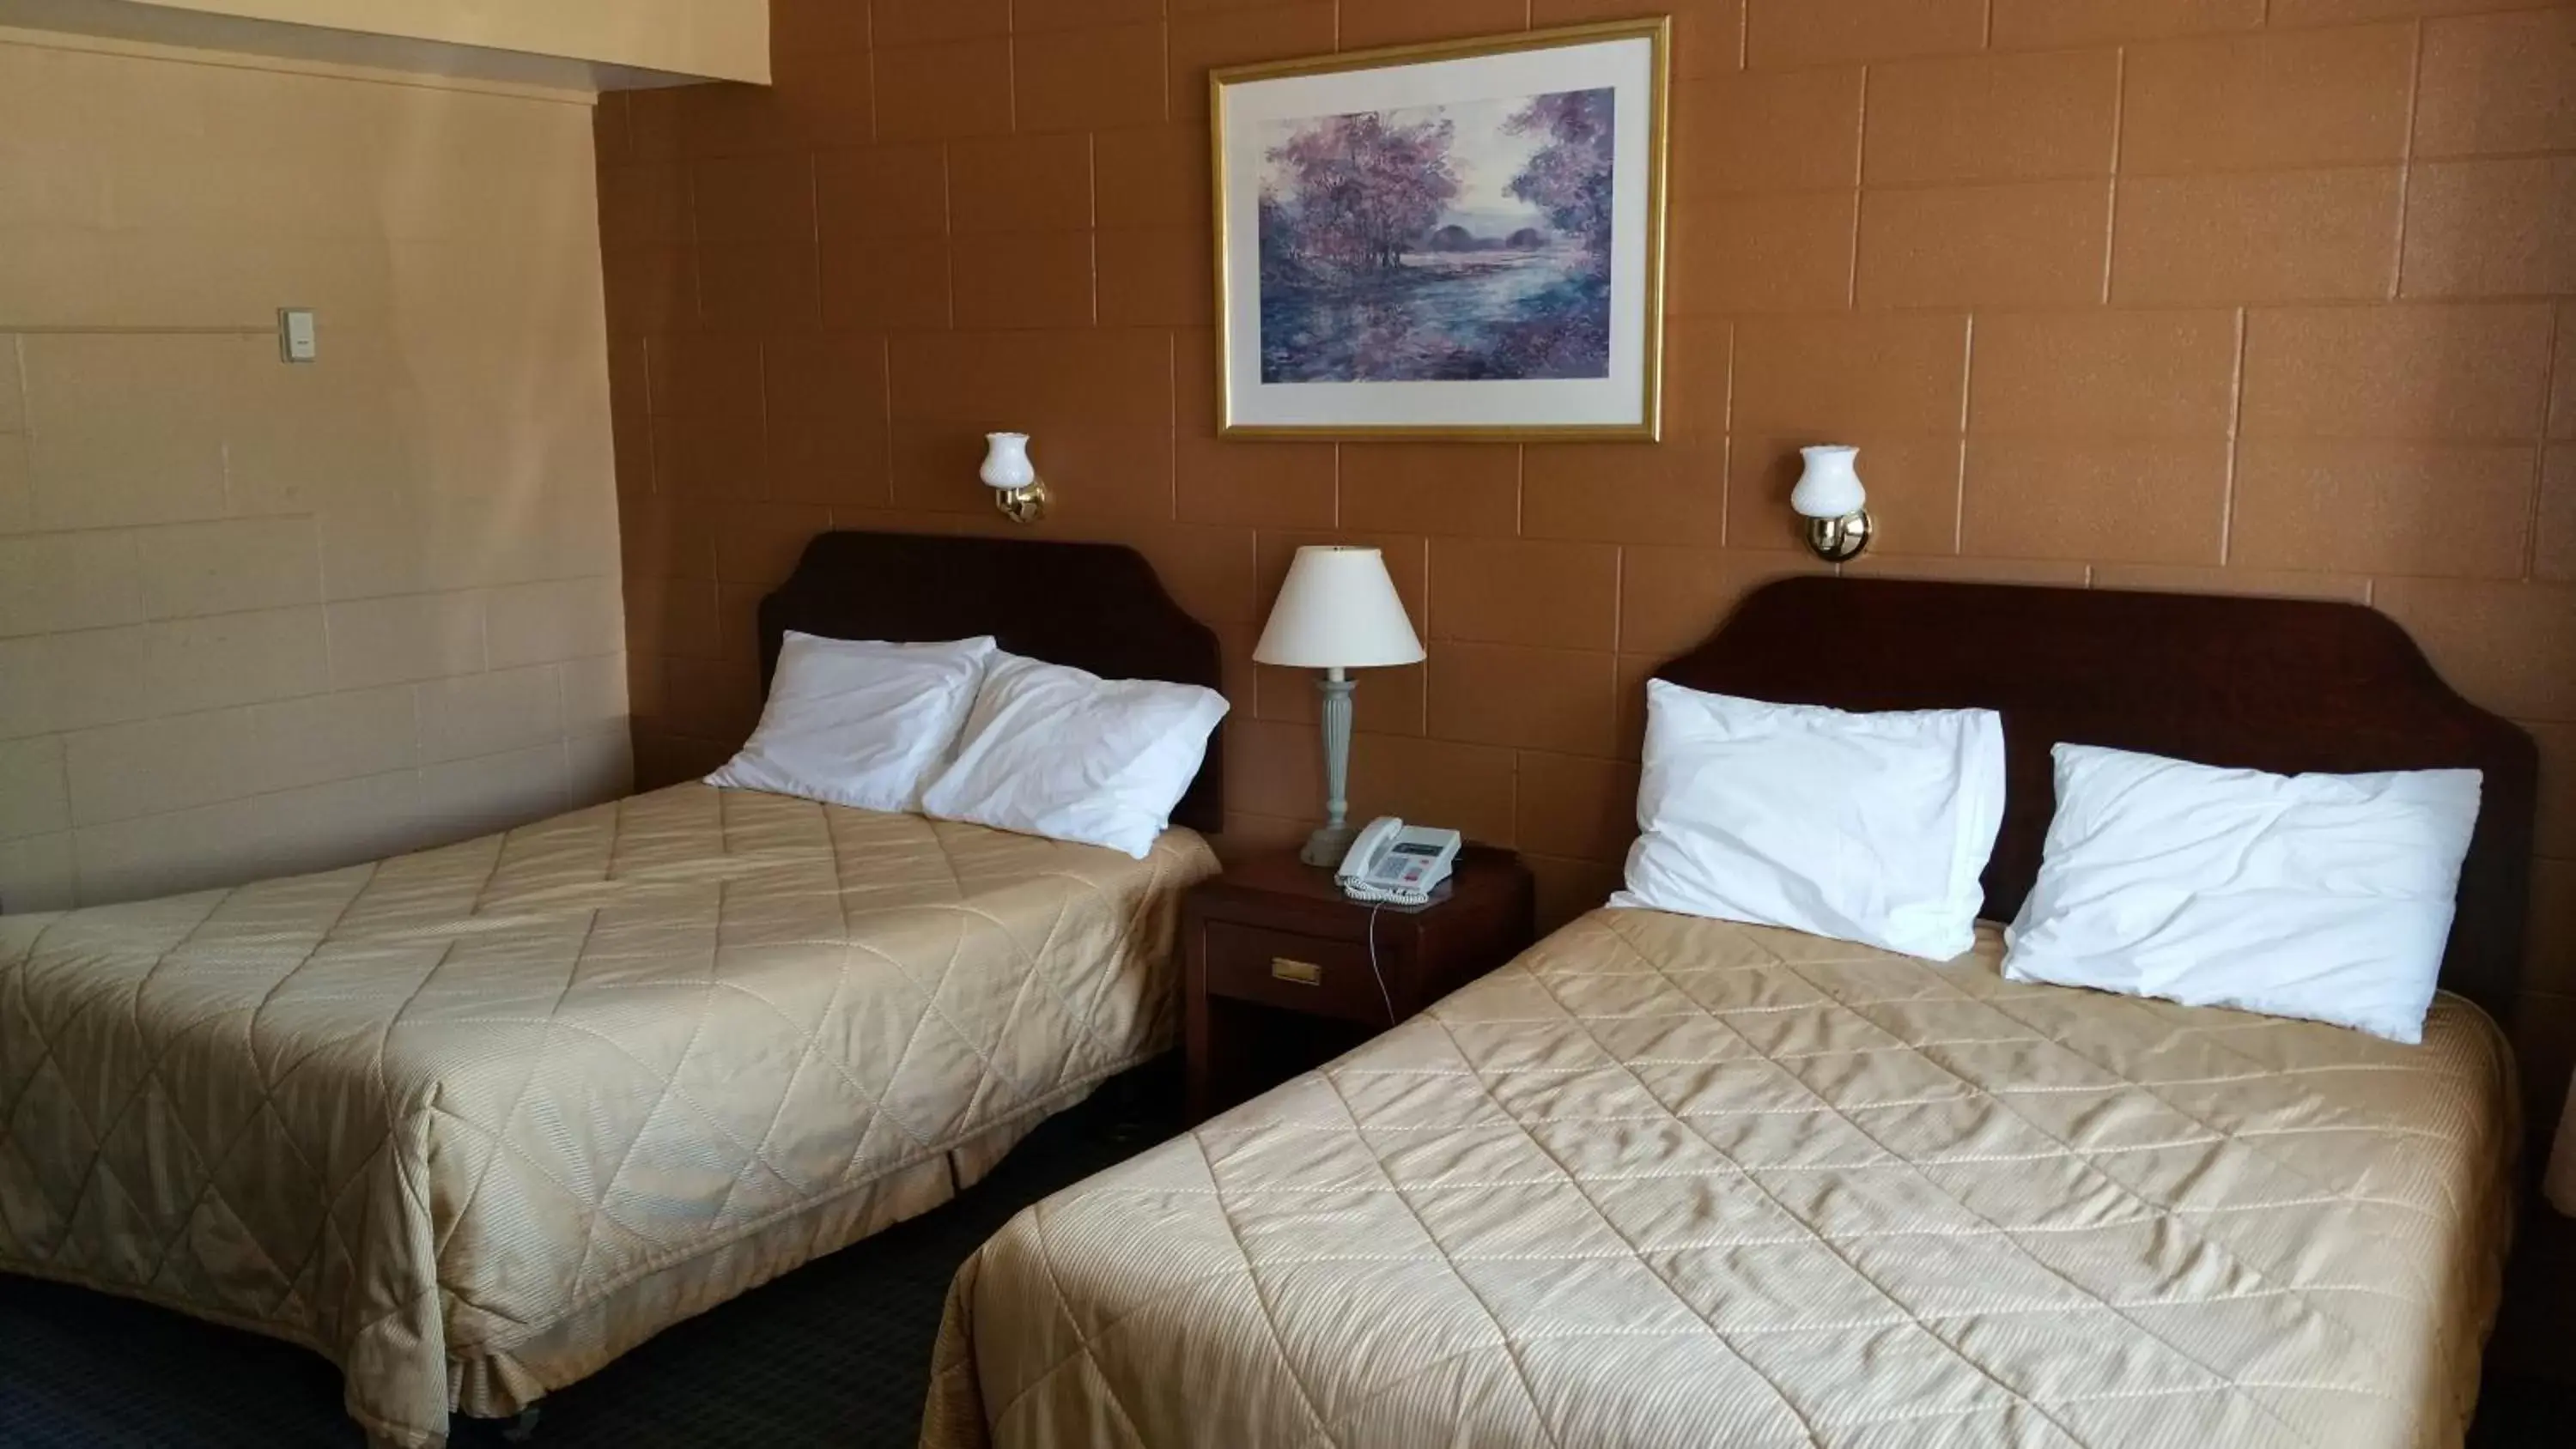 Bed, Room Photo in Riverview Motel